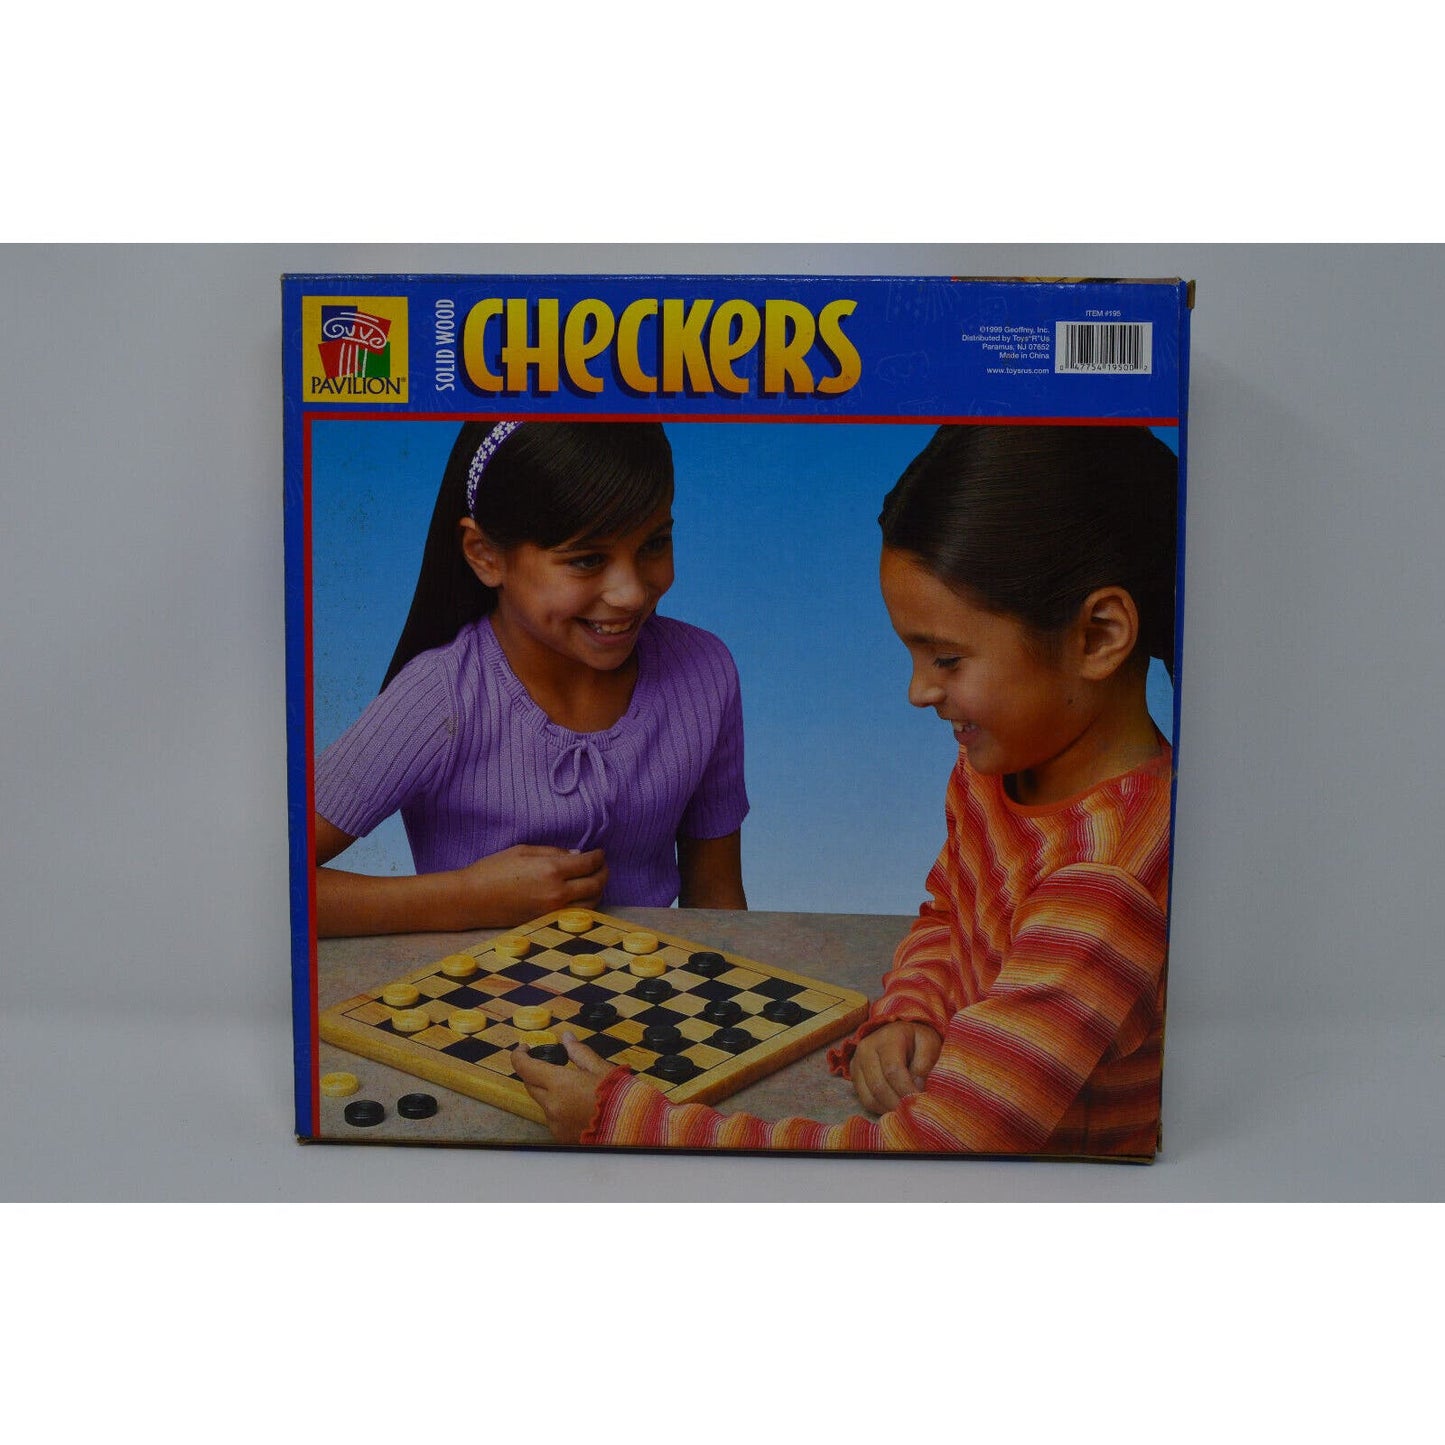 Pavilion Solid Checkers & Tic-Tac-Toe 2-Sided Oak Finish Board with Wood Pieces